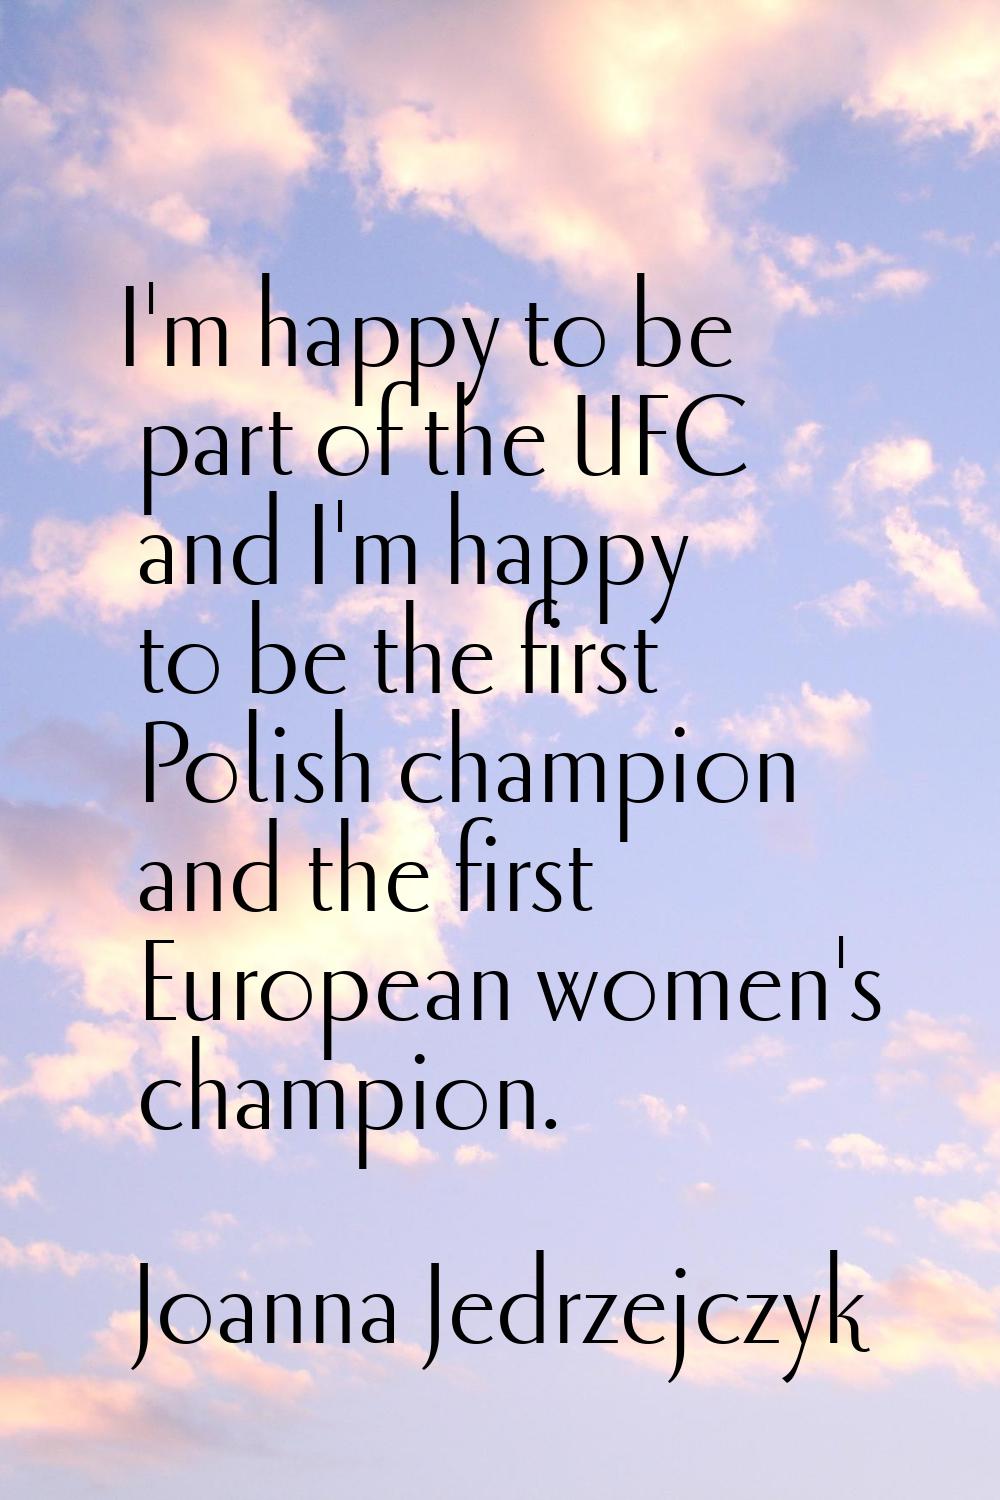 I'm happy to be part of the UFC and I'm happy to be the first Polish champion and the first Europea